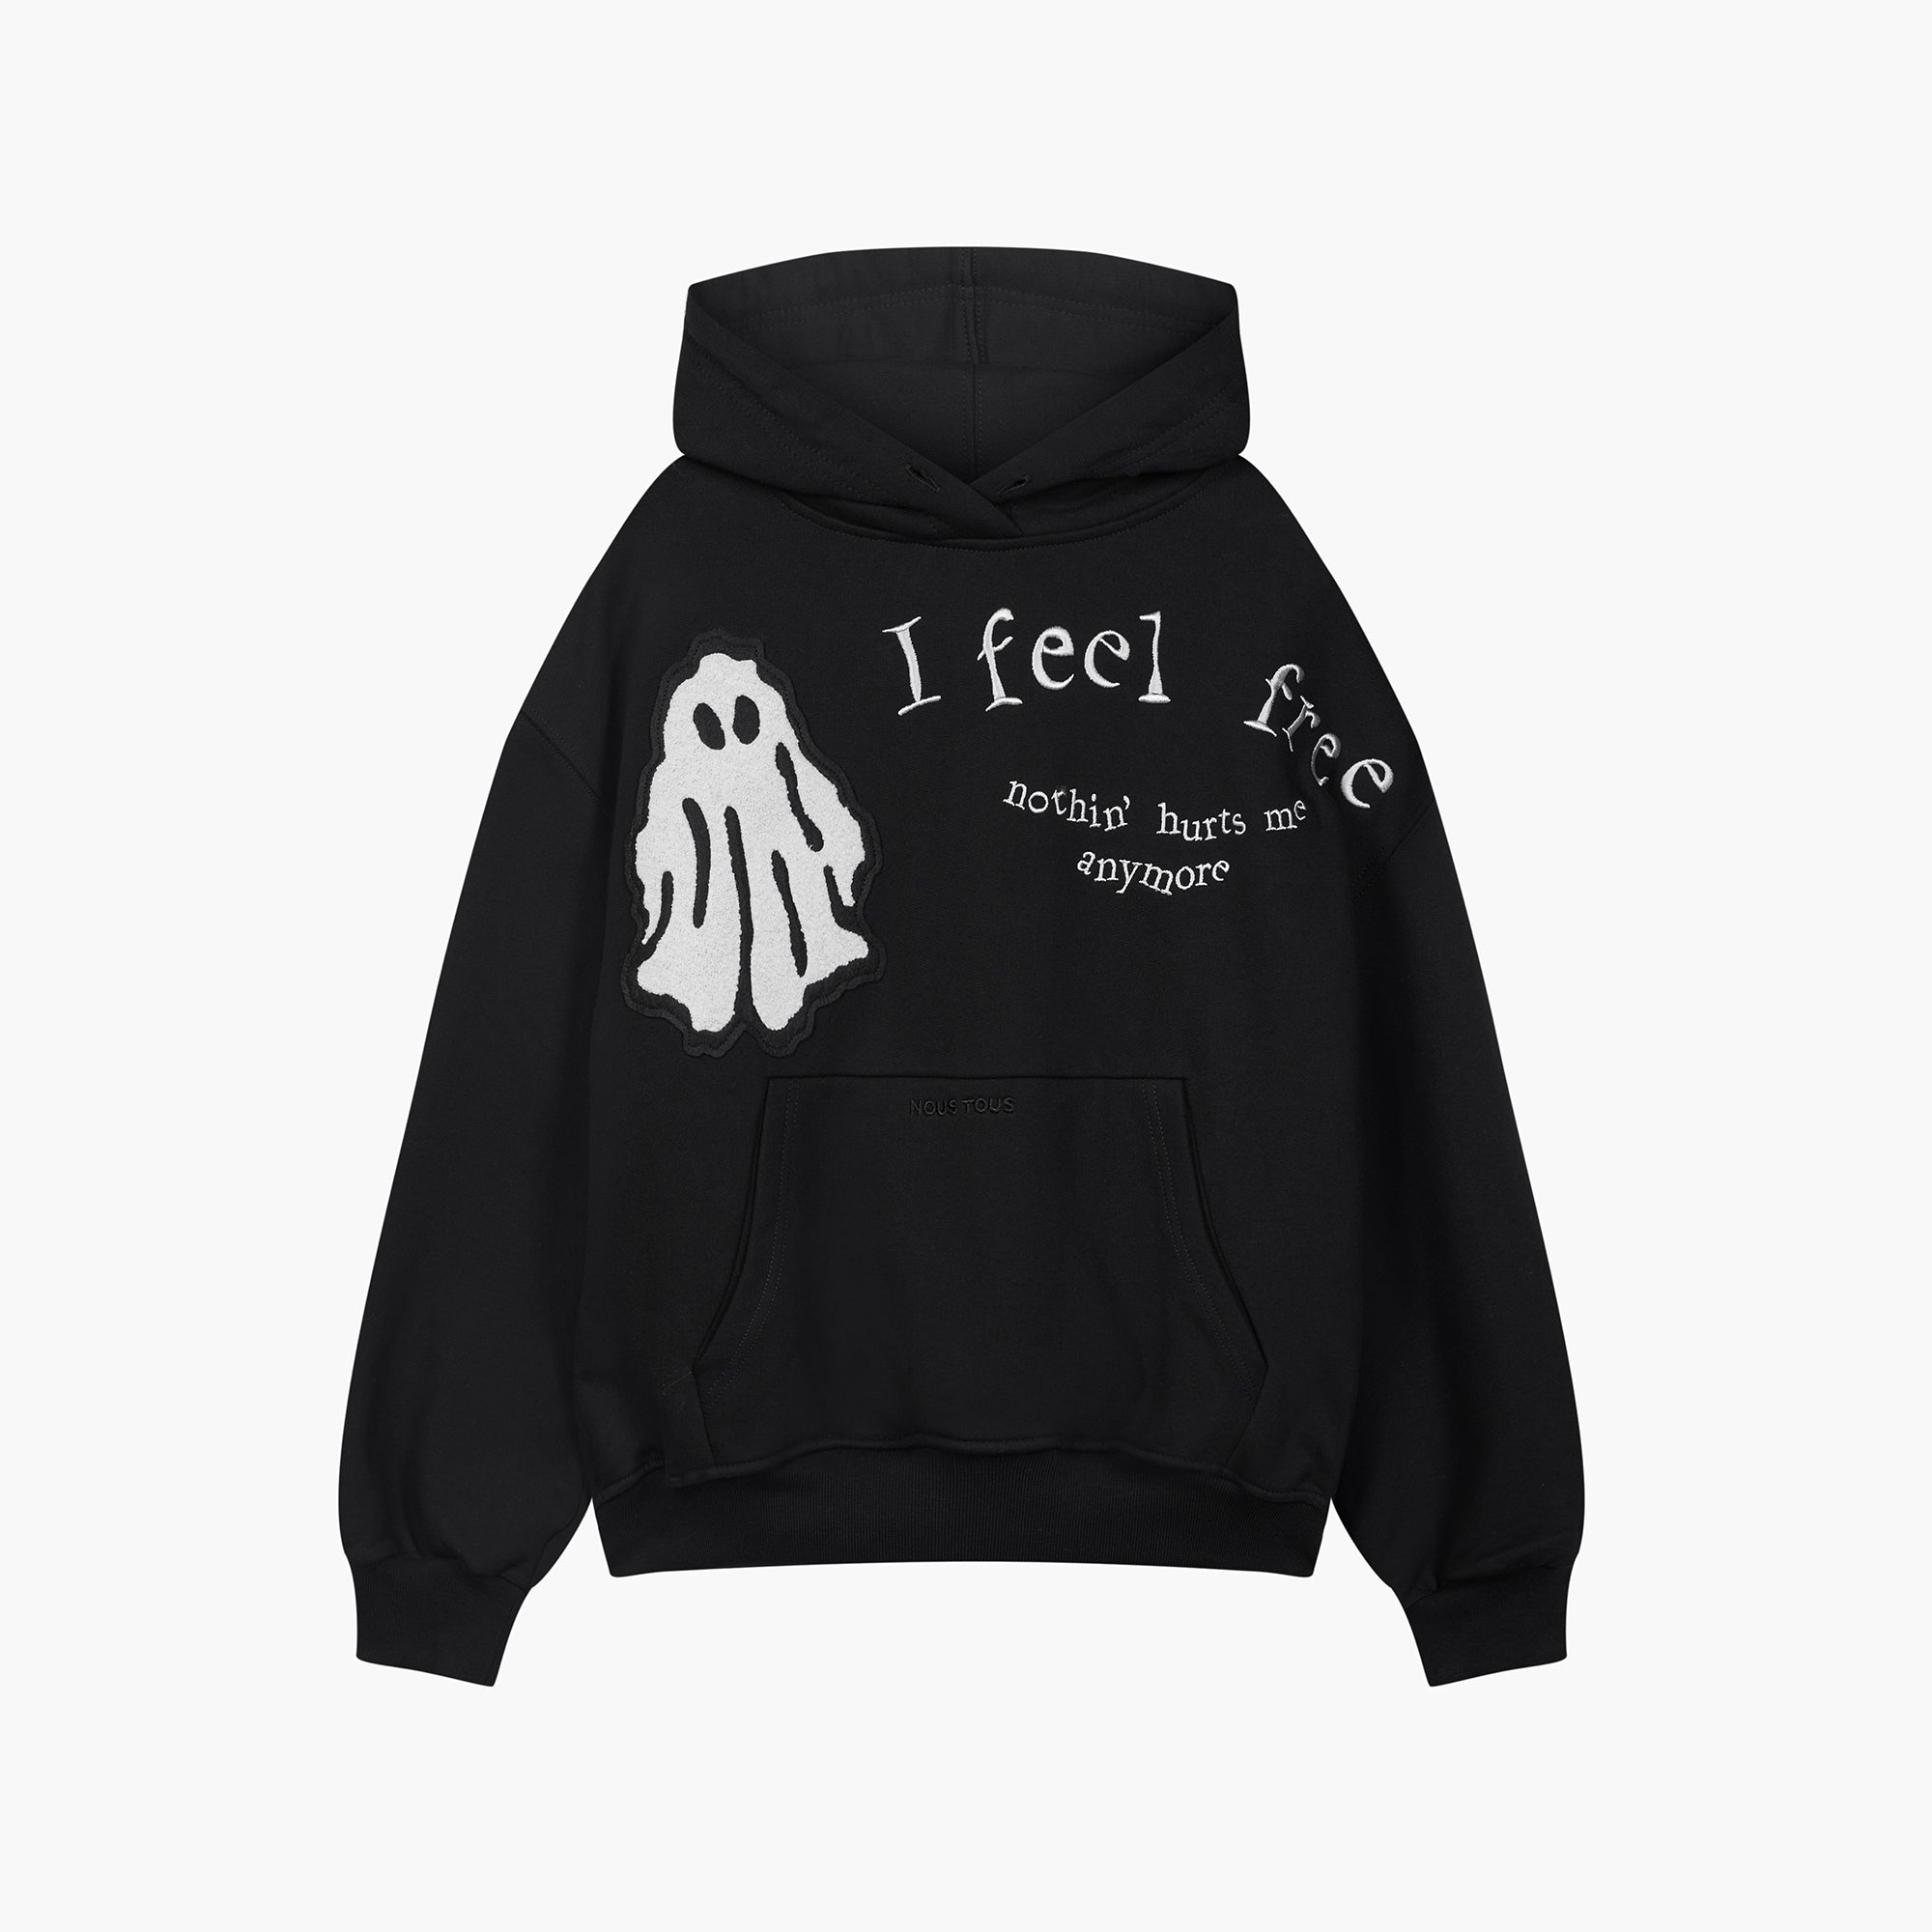 BLUZA GHOST I FEEL FREE FROTTE CZARNY - Nous Tous